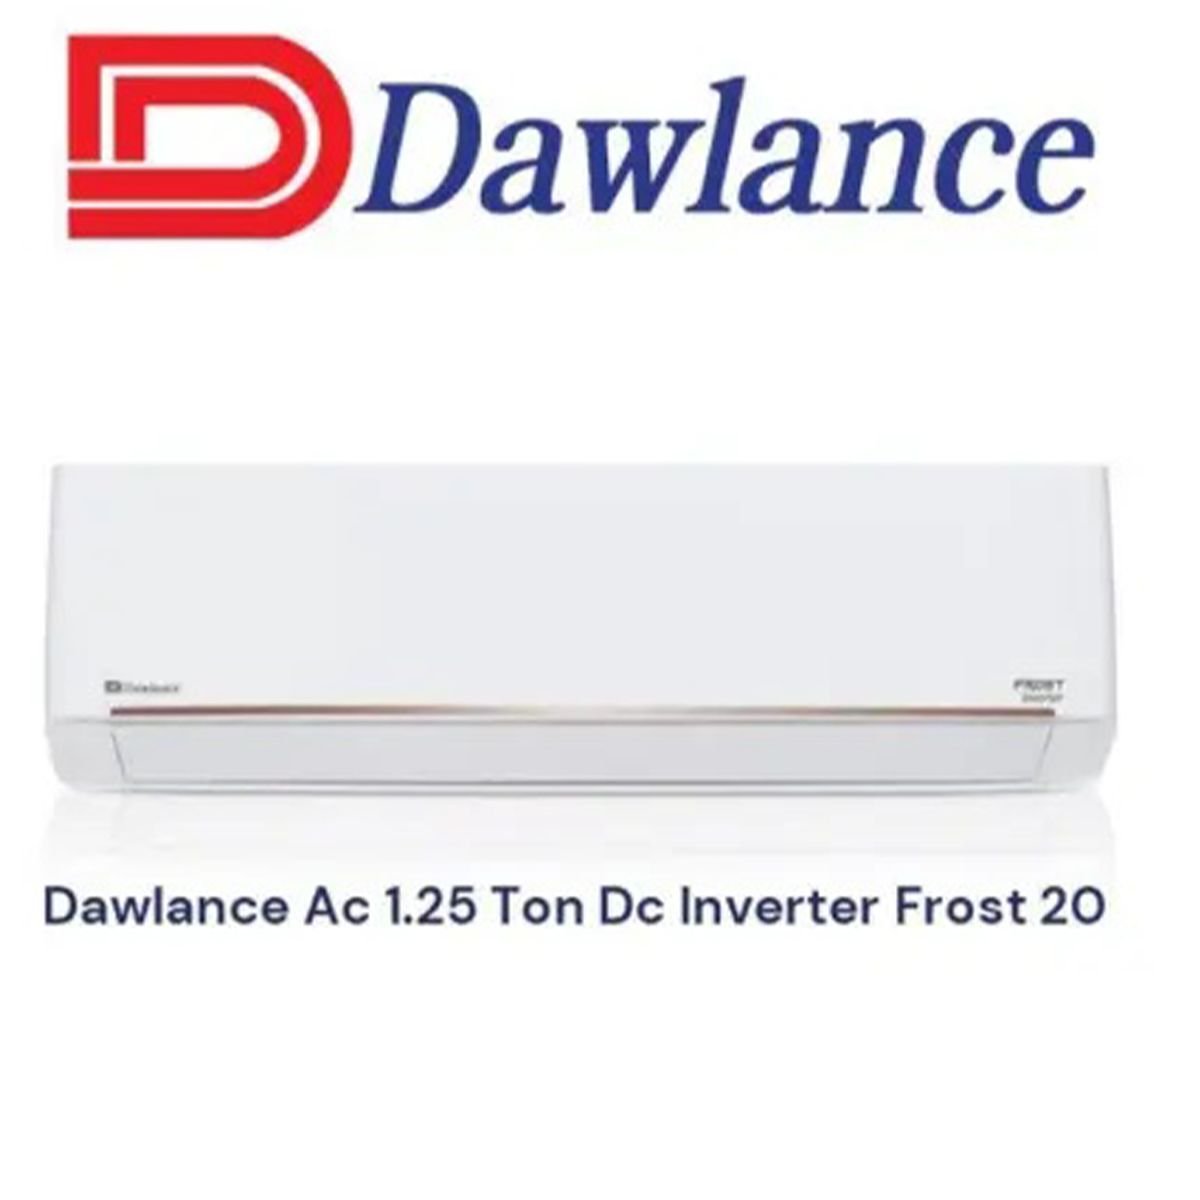 DC Inverter 1.25 Ton Split AC: Efficient and Reliable Cooling Solution for Your Space